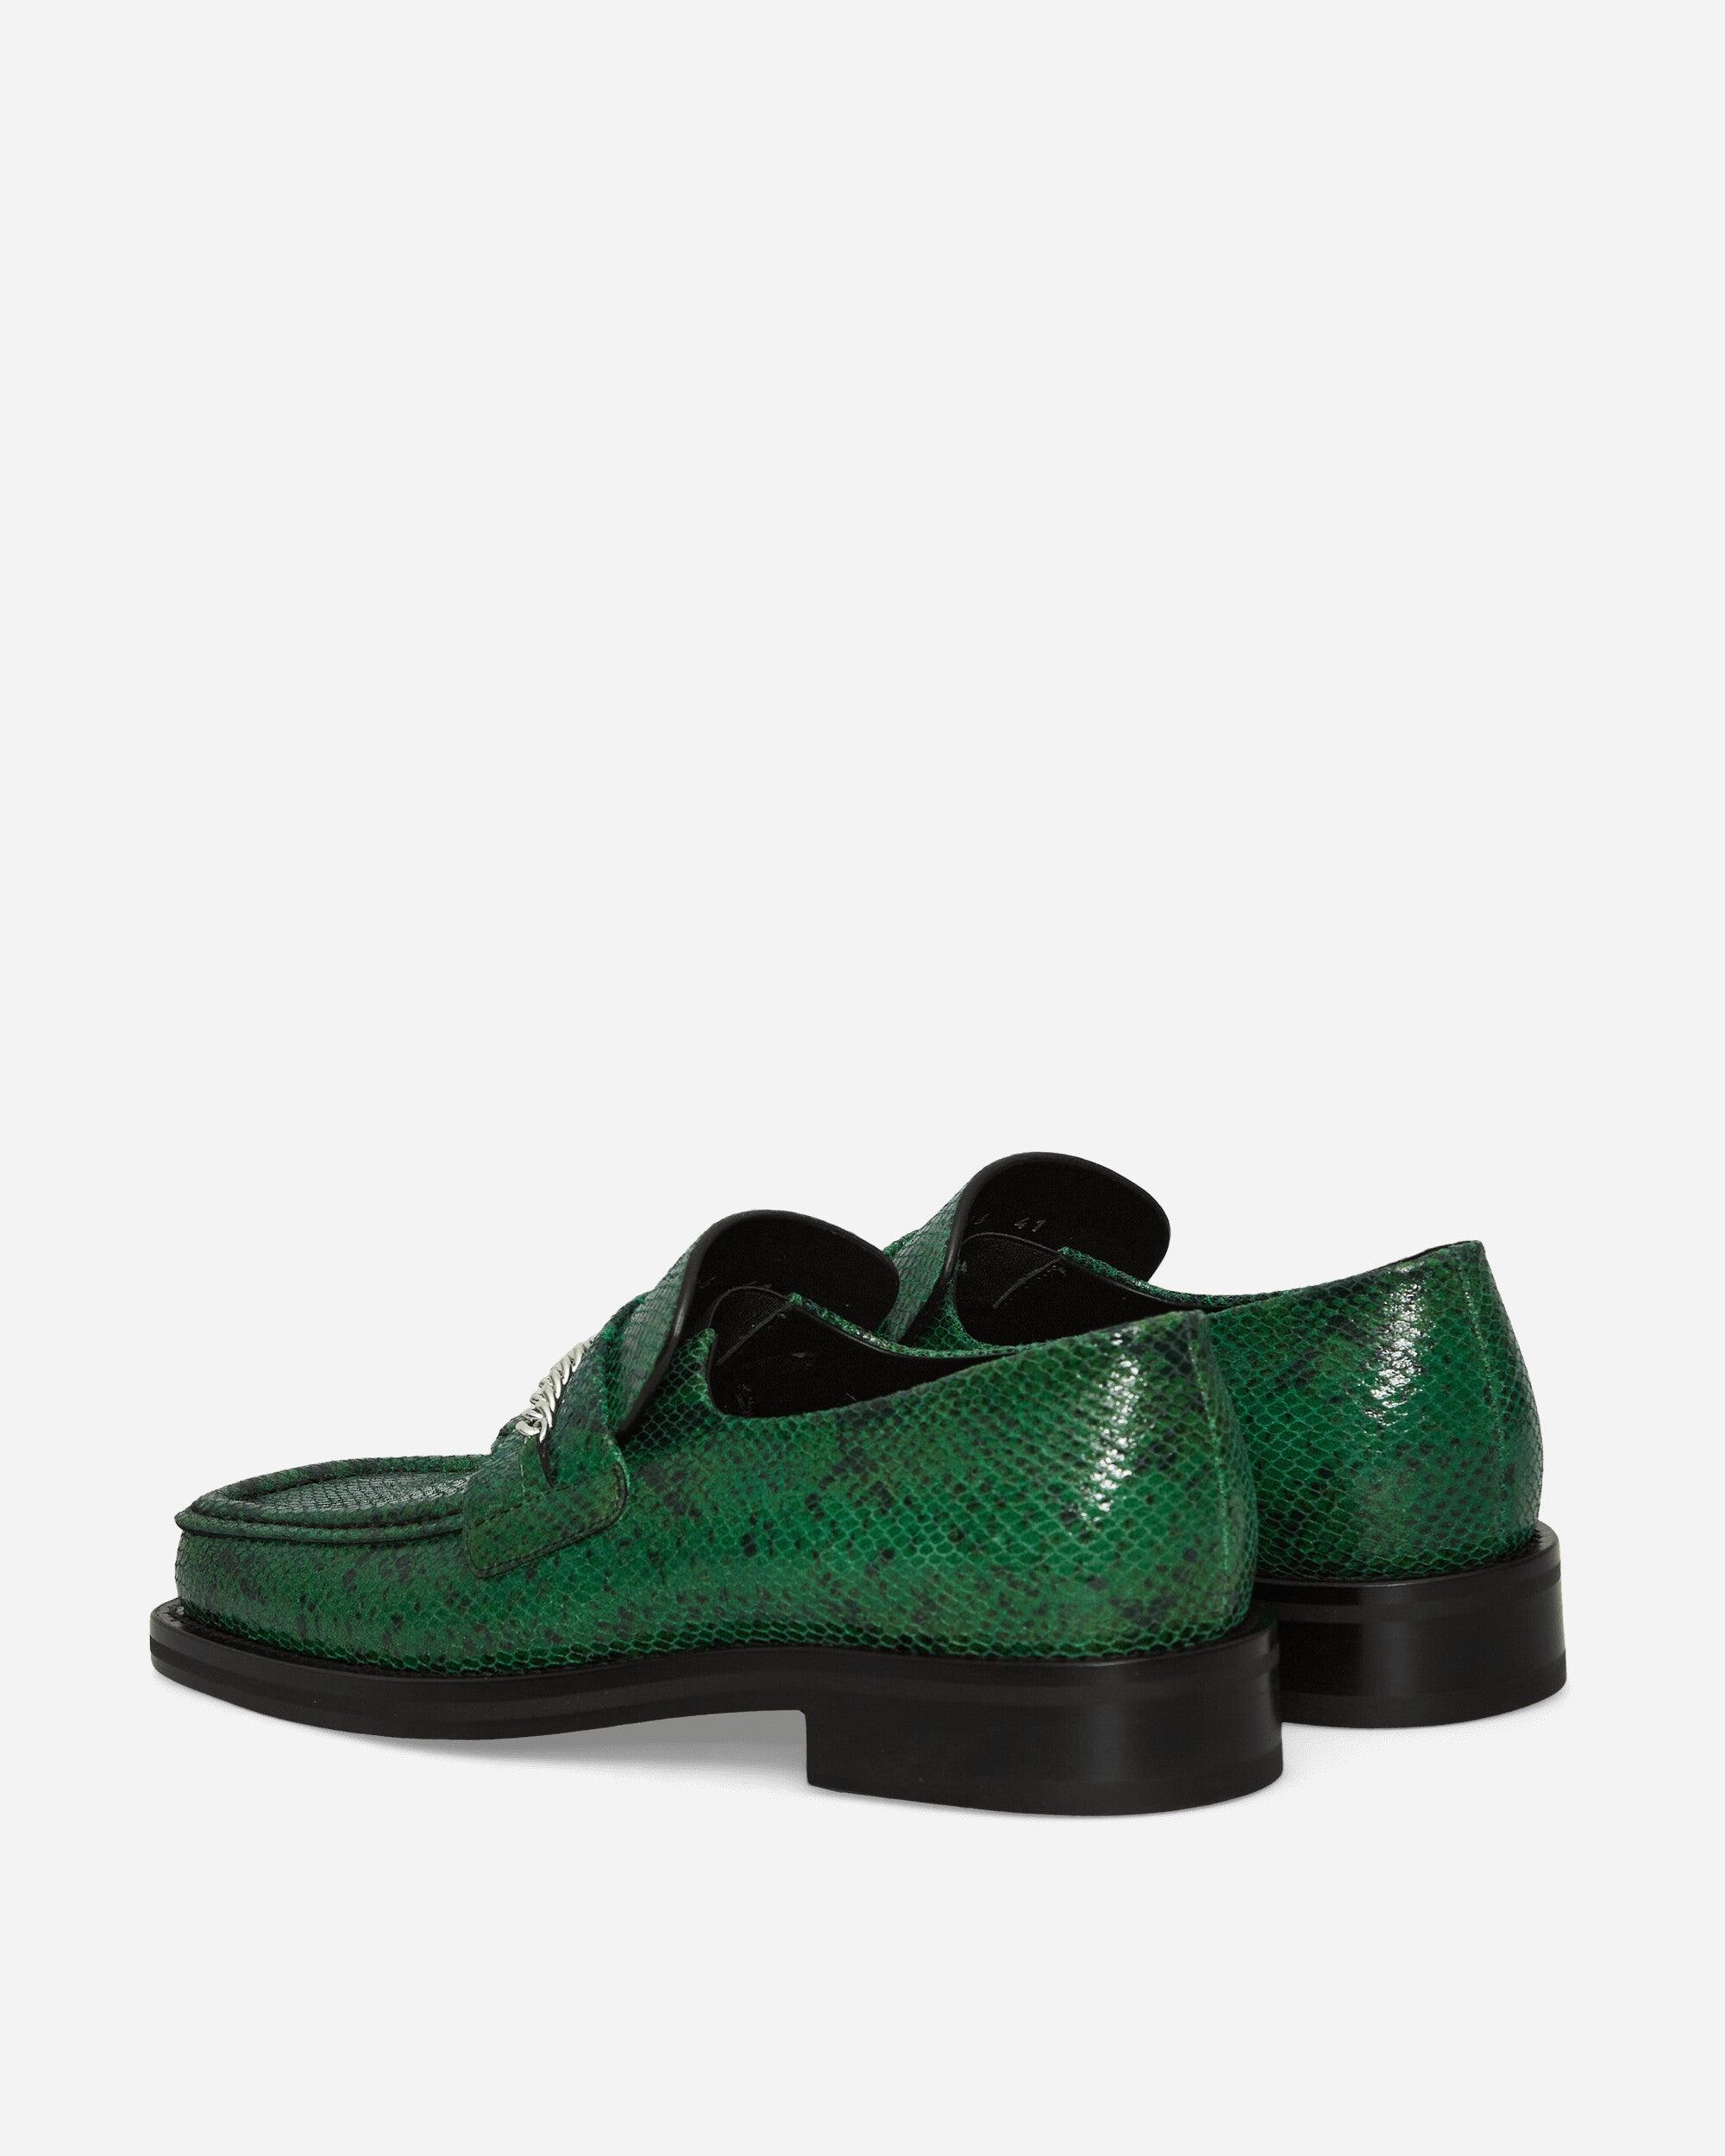 Martine Rose Square Toe Loafers in Green for Men | Lyst